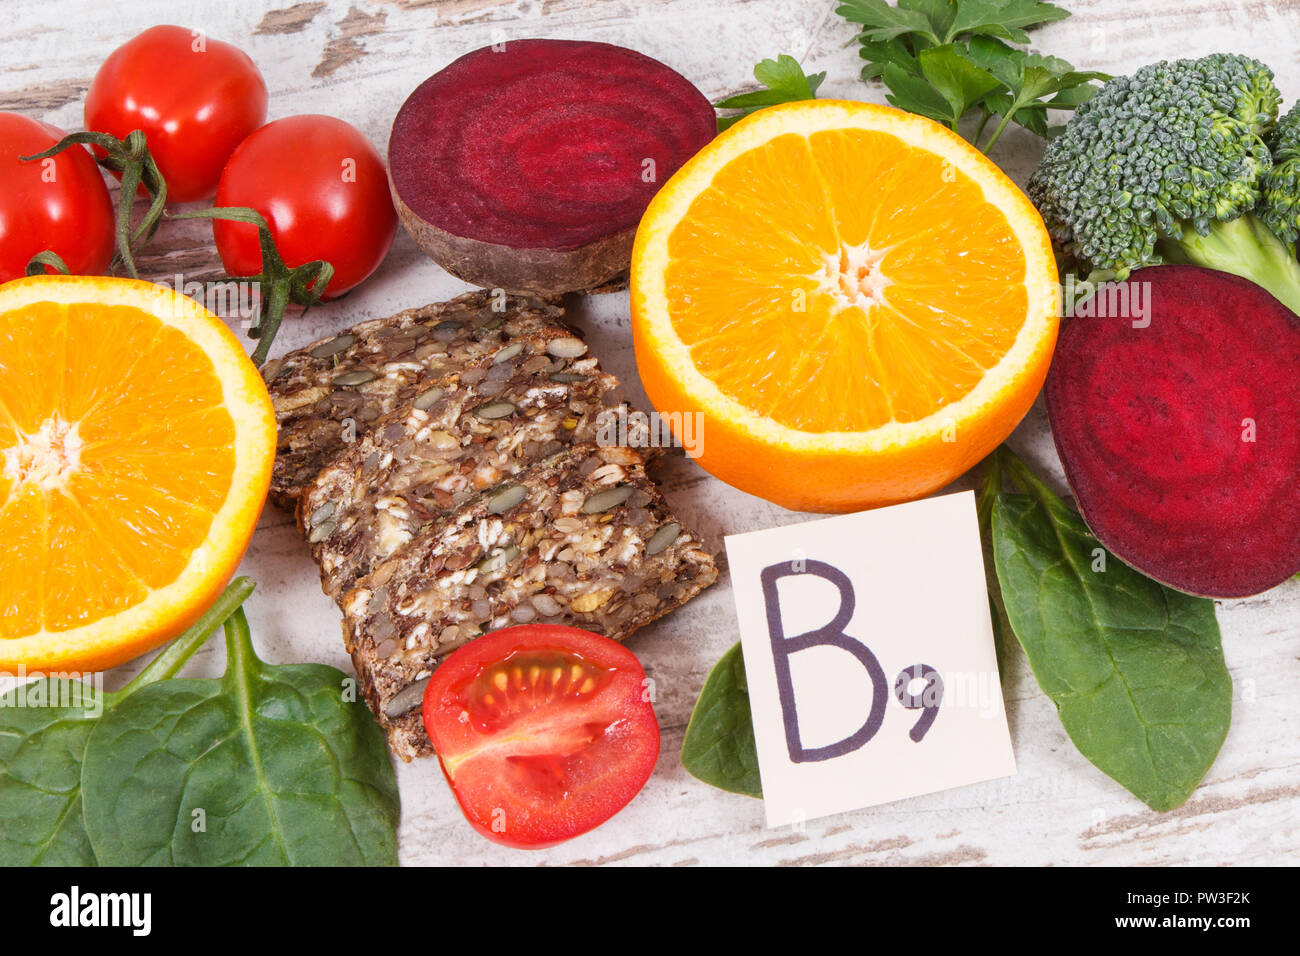 Nutritious ingredients containing vitamin B9, dietary fiber, natural minerals and folic acid, concept of healthy nutrition Stock Photo